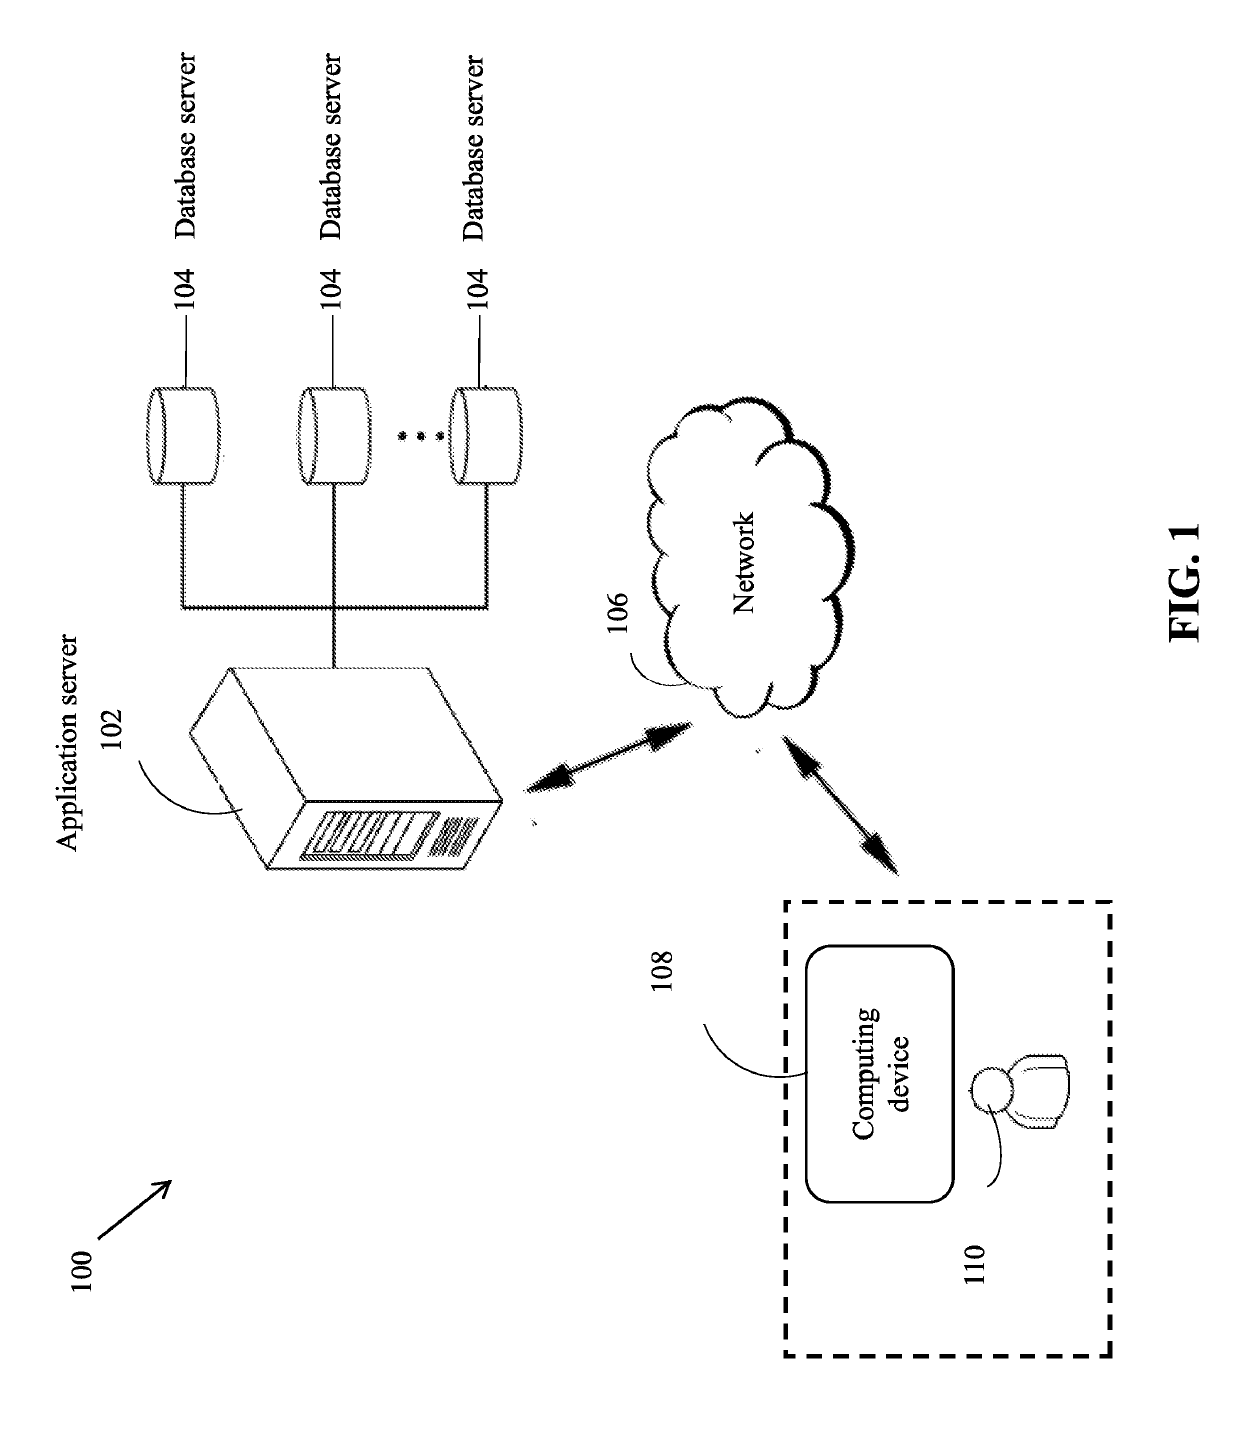 Method and system for auto learning, artificial intelligence (AI) applications development, operationalization and execution